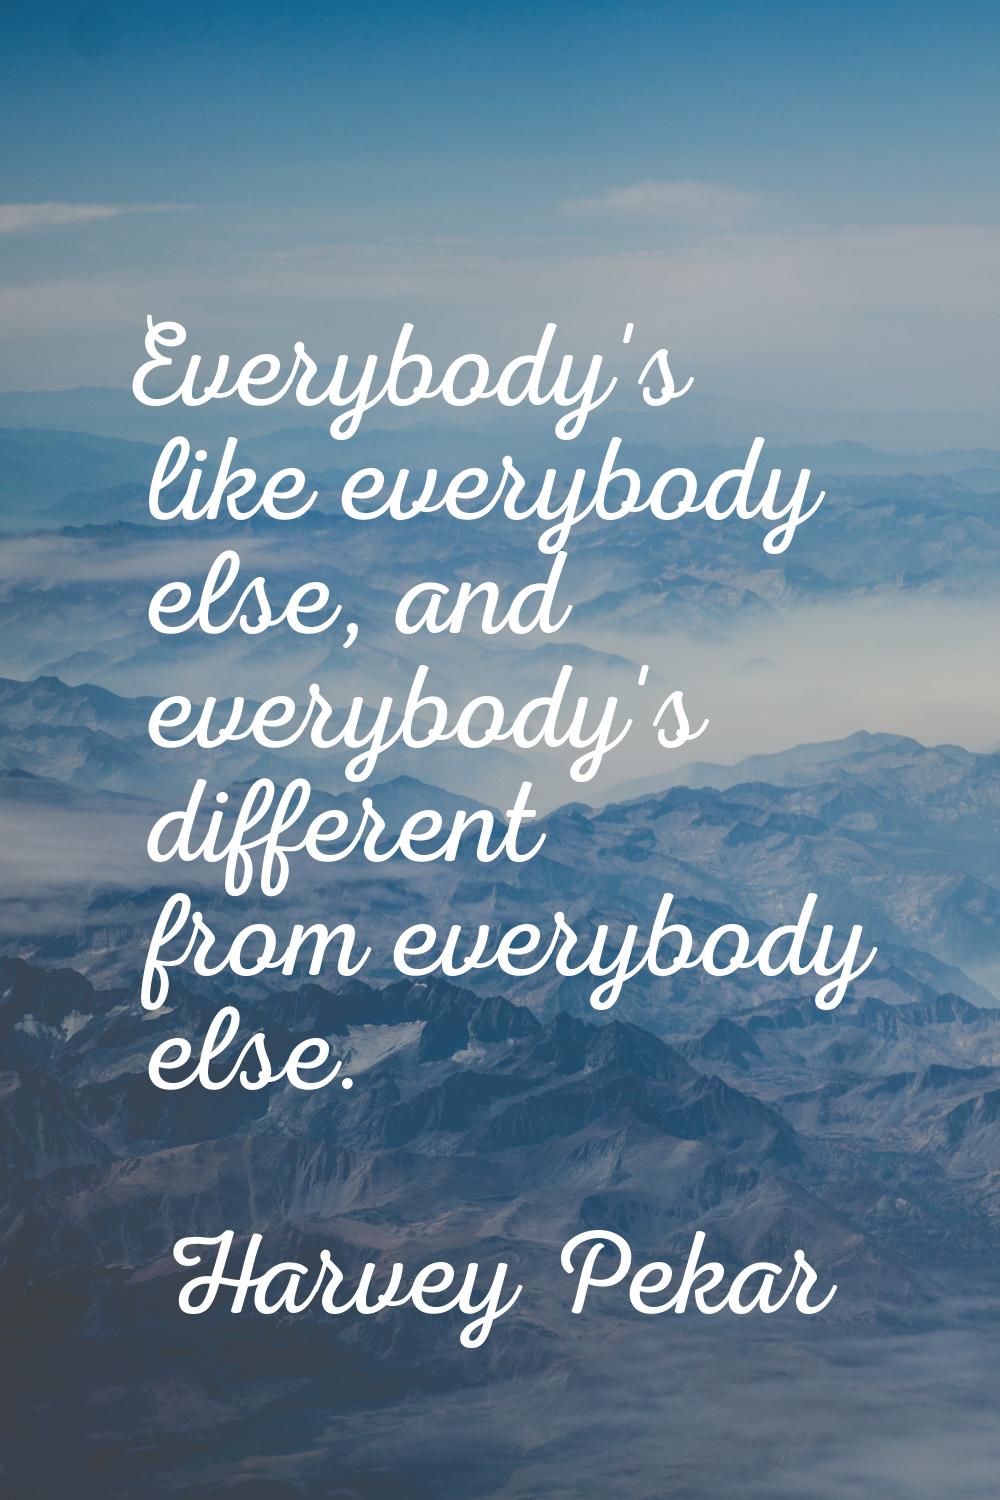 Everybody's like everybody else, and everybody's different from everybody else.